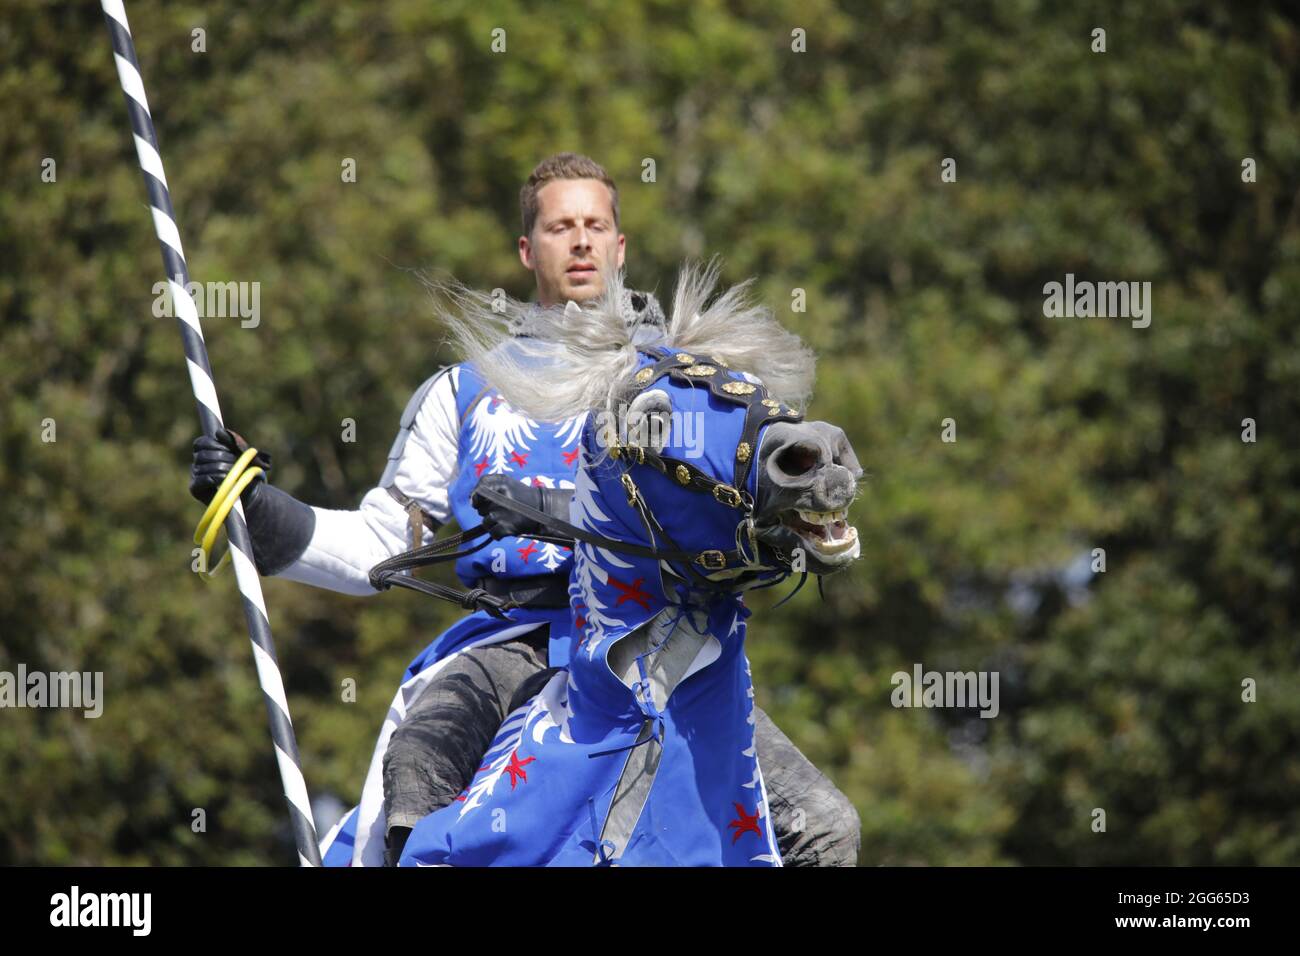 Herstmonceux,UK. 29th Aug 2021.  England's medieval festival continues today with a Knights tournament and jousting from the spectacular Pferdestunt company.The festival runs over the bank holiday weekend & attracts thousands of visitors interested in everything medieval. Credit: Ed Brown/Alamy Live News Stock Photo